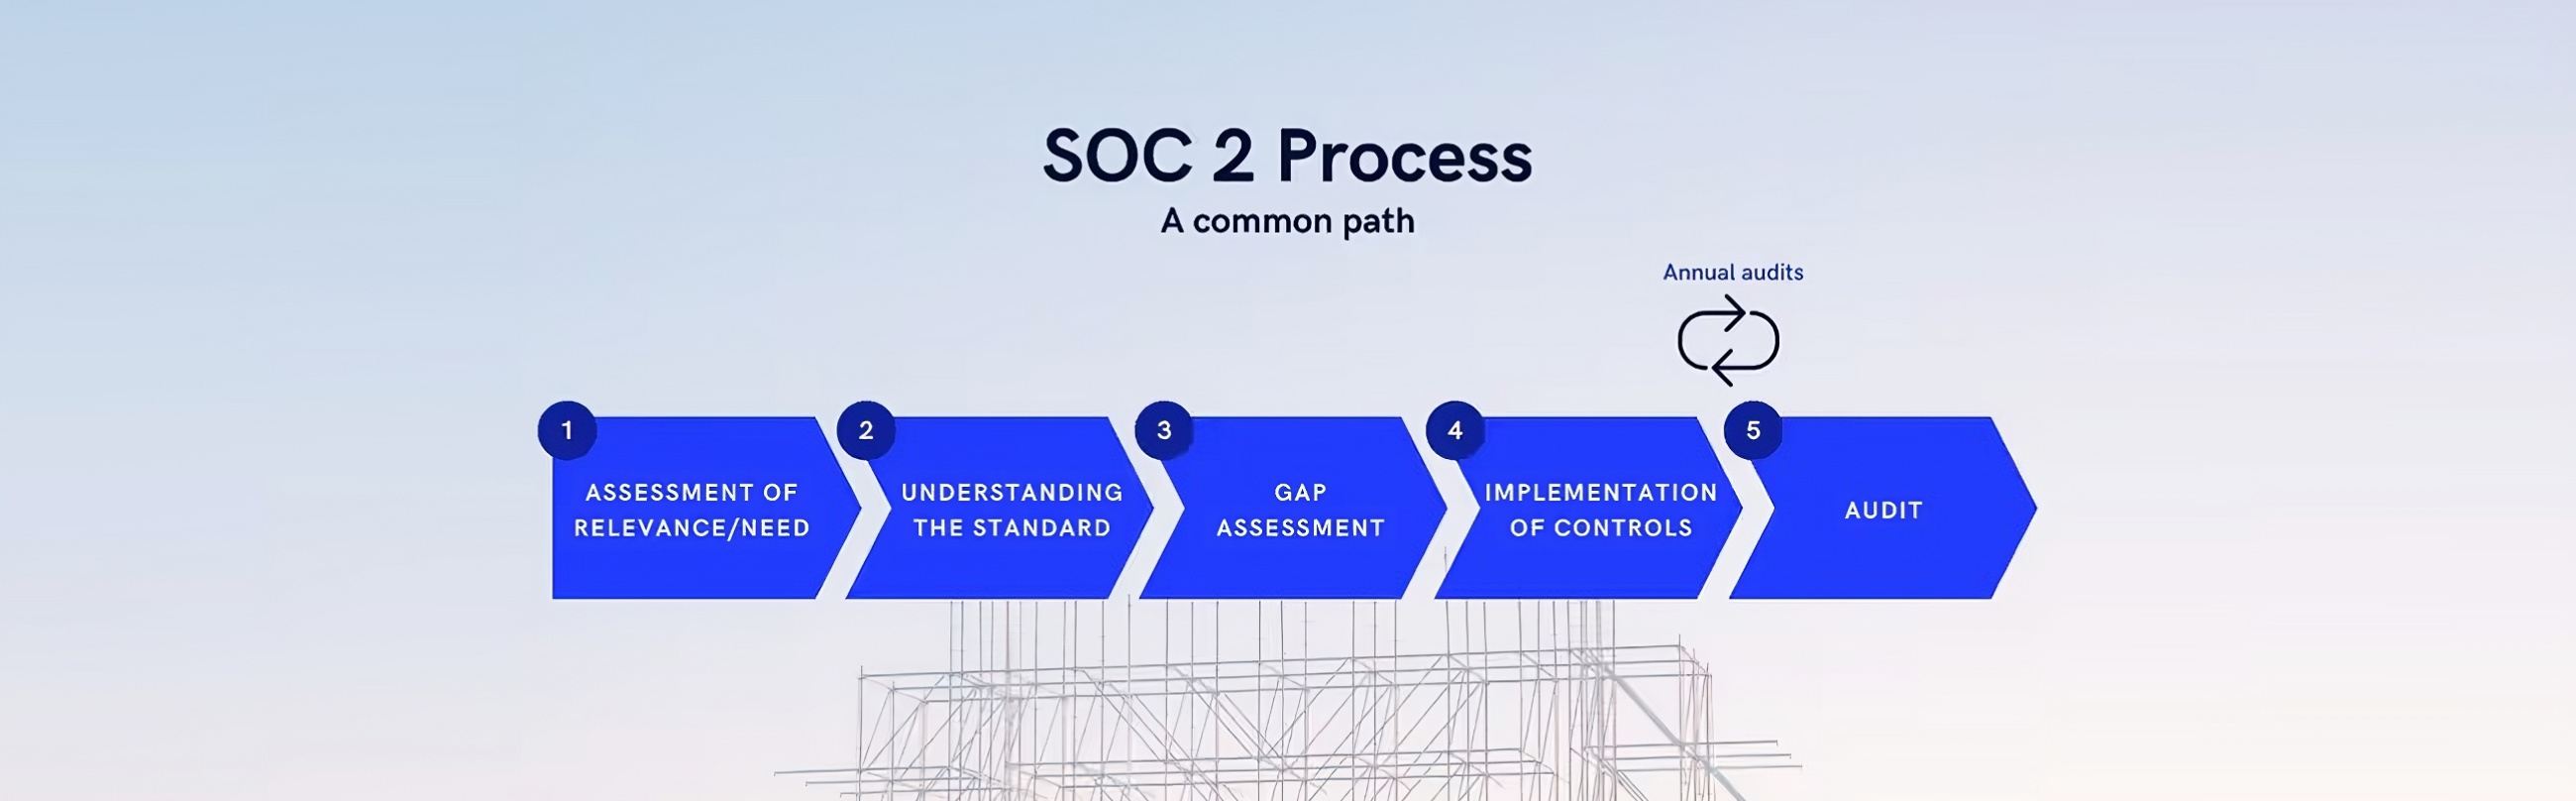 The End-to-End SOC 2 Certification Process